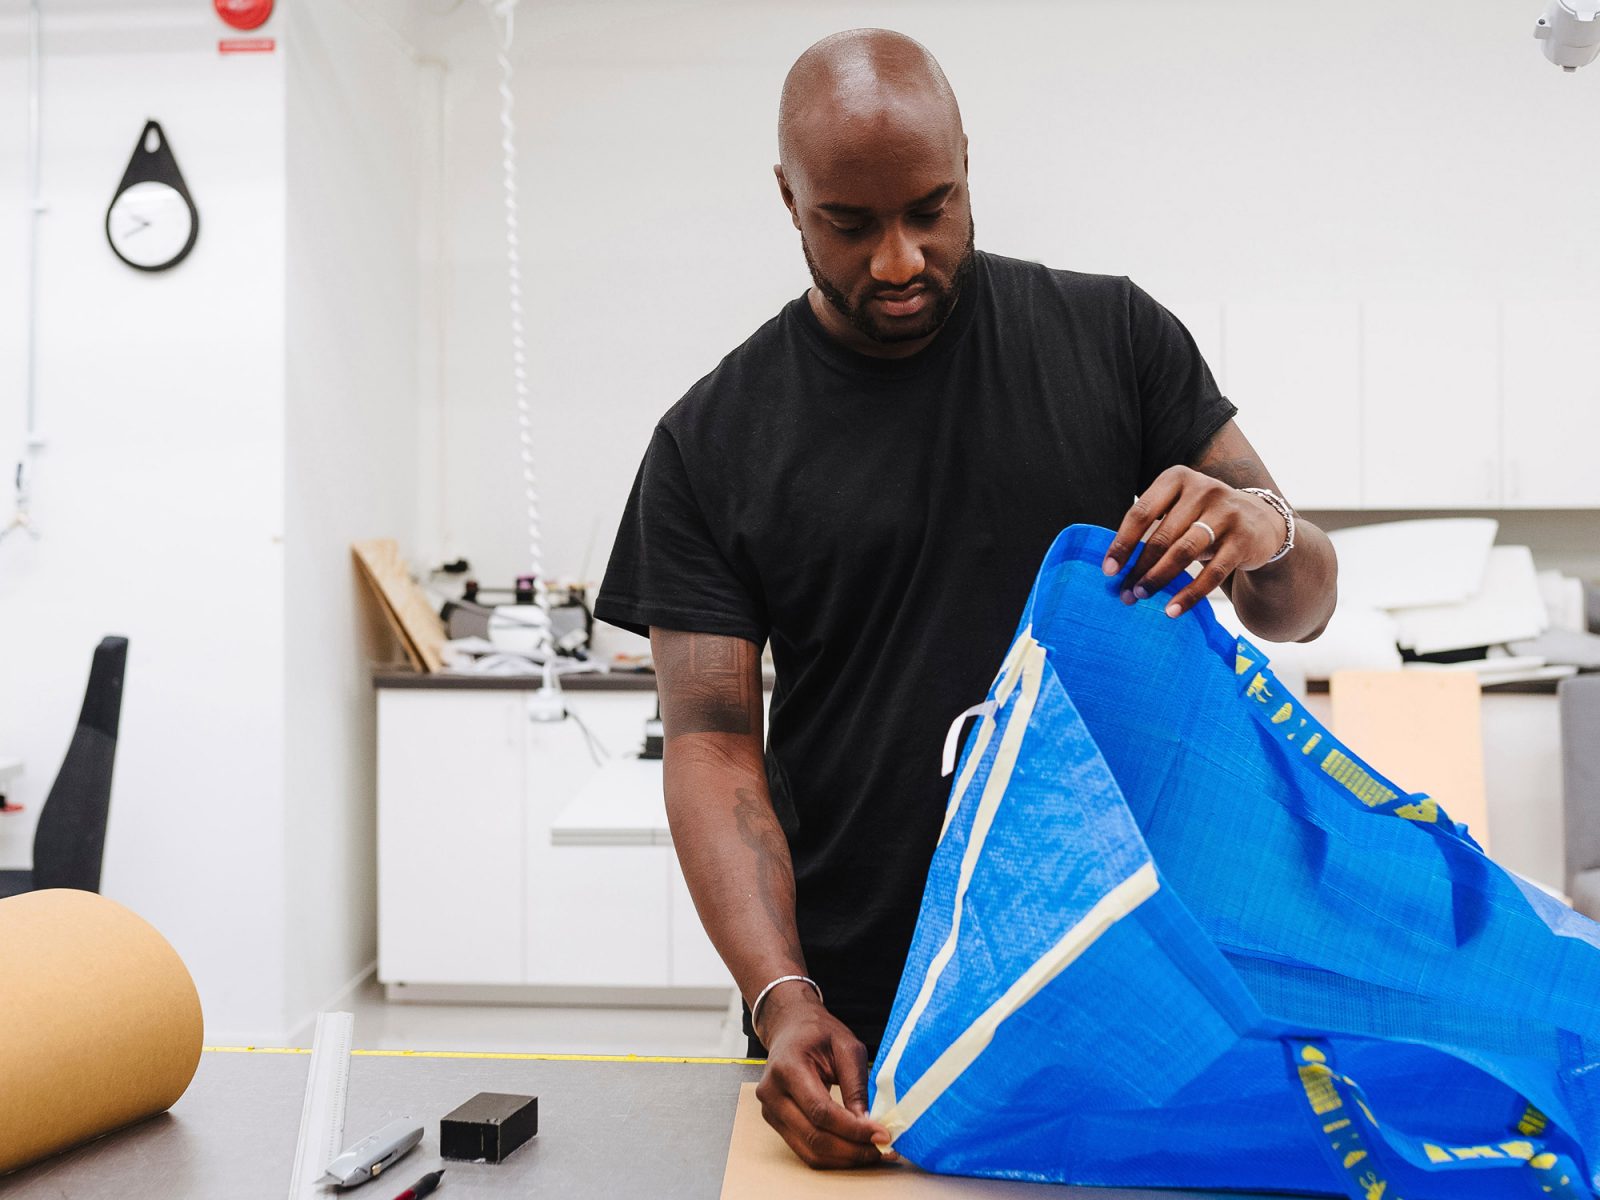 A man in a T-shirt, with shaved head, Virgil Abloh, working on a redesign of a blue FRAKTA bag in a workshop.